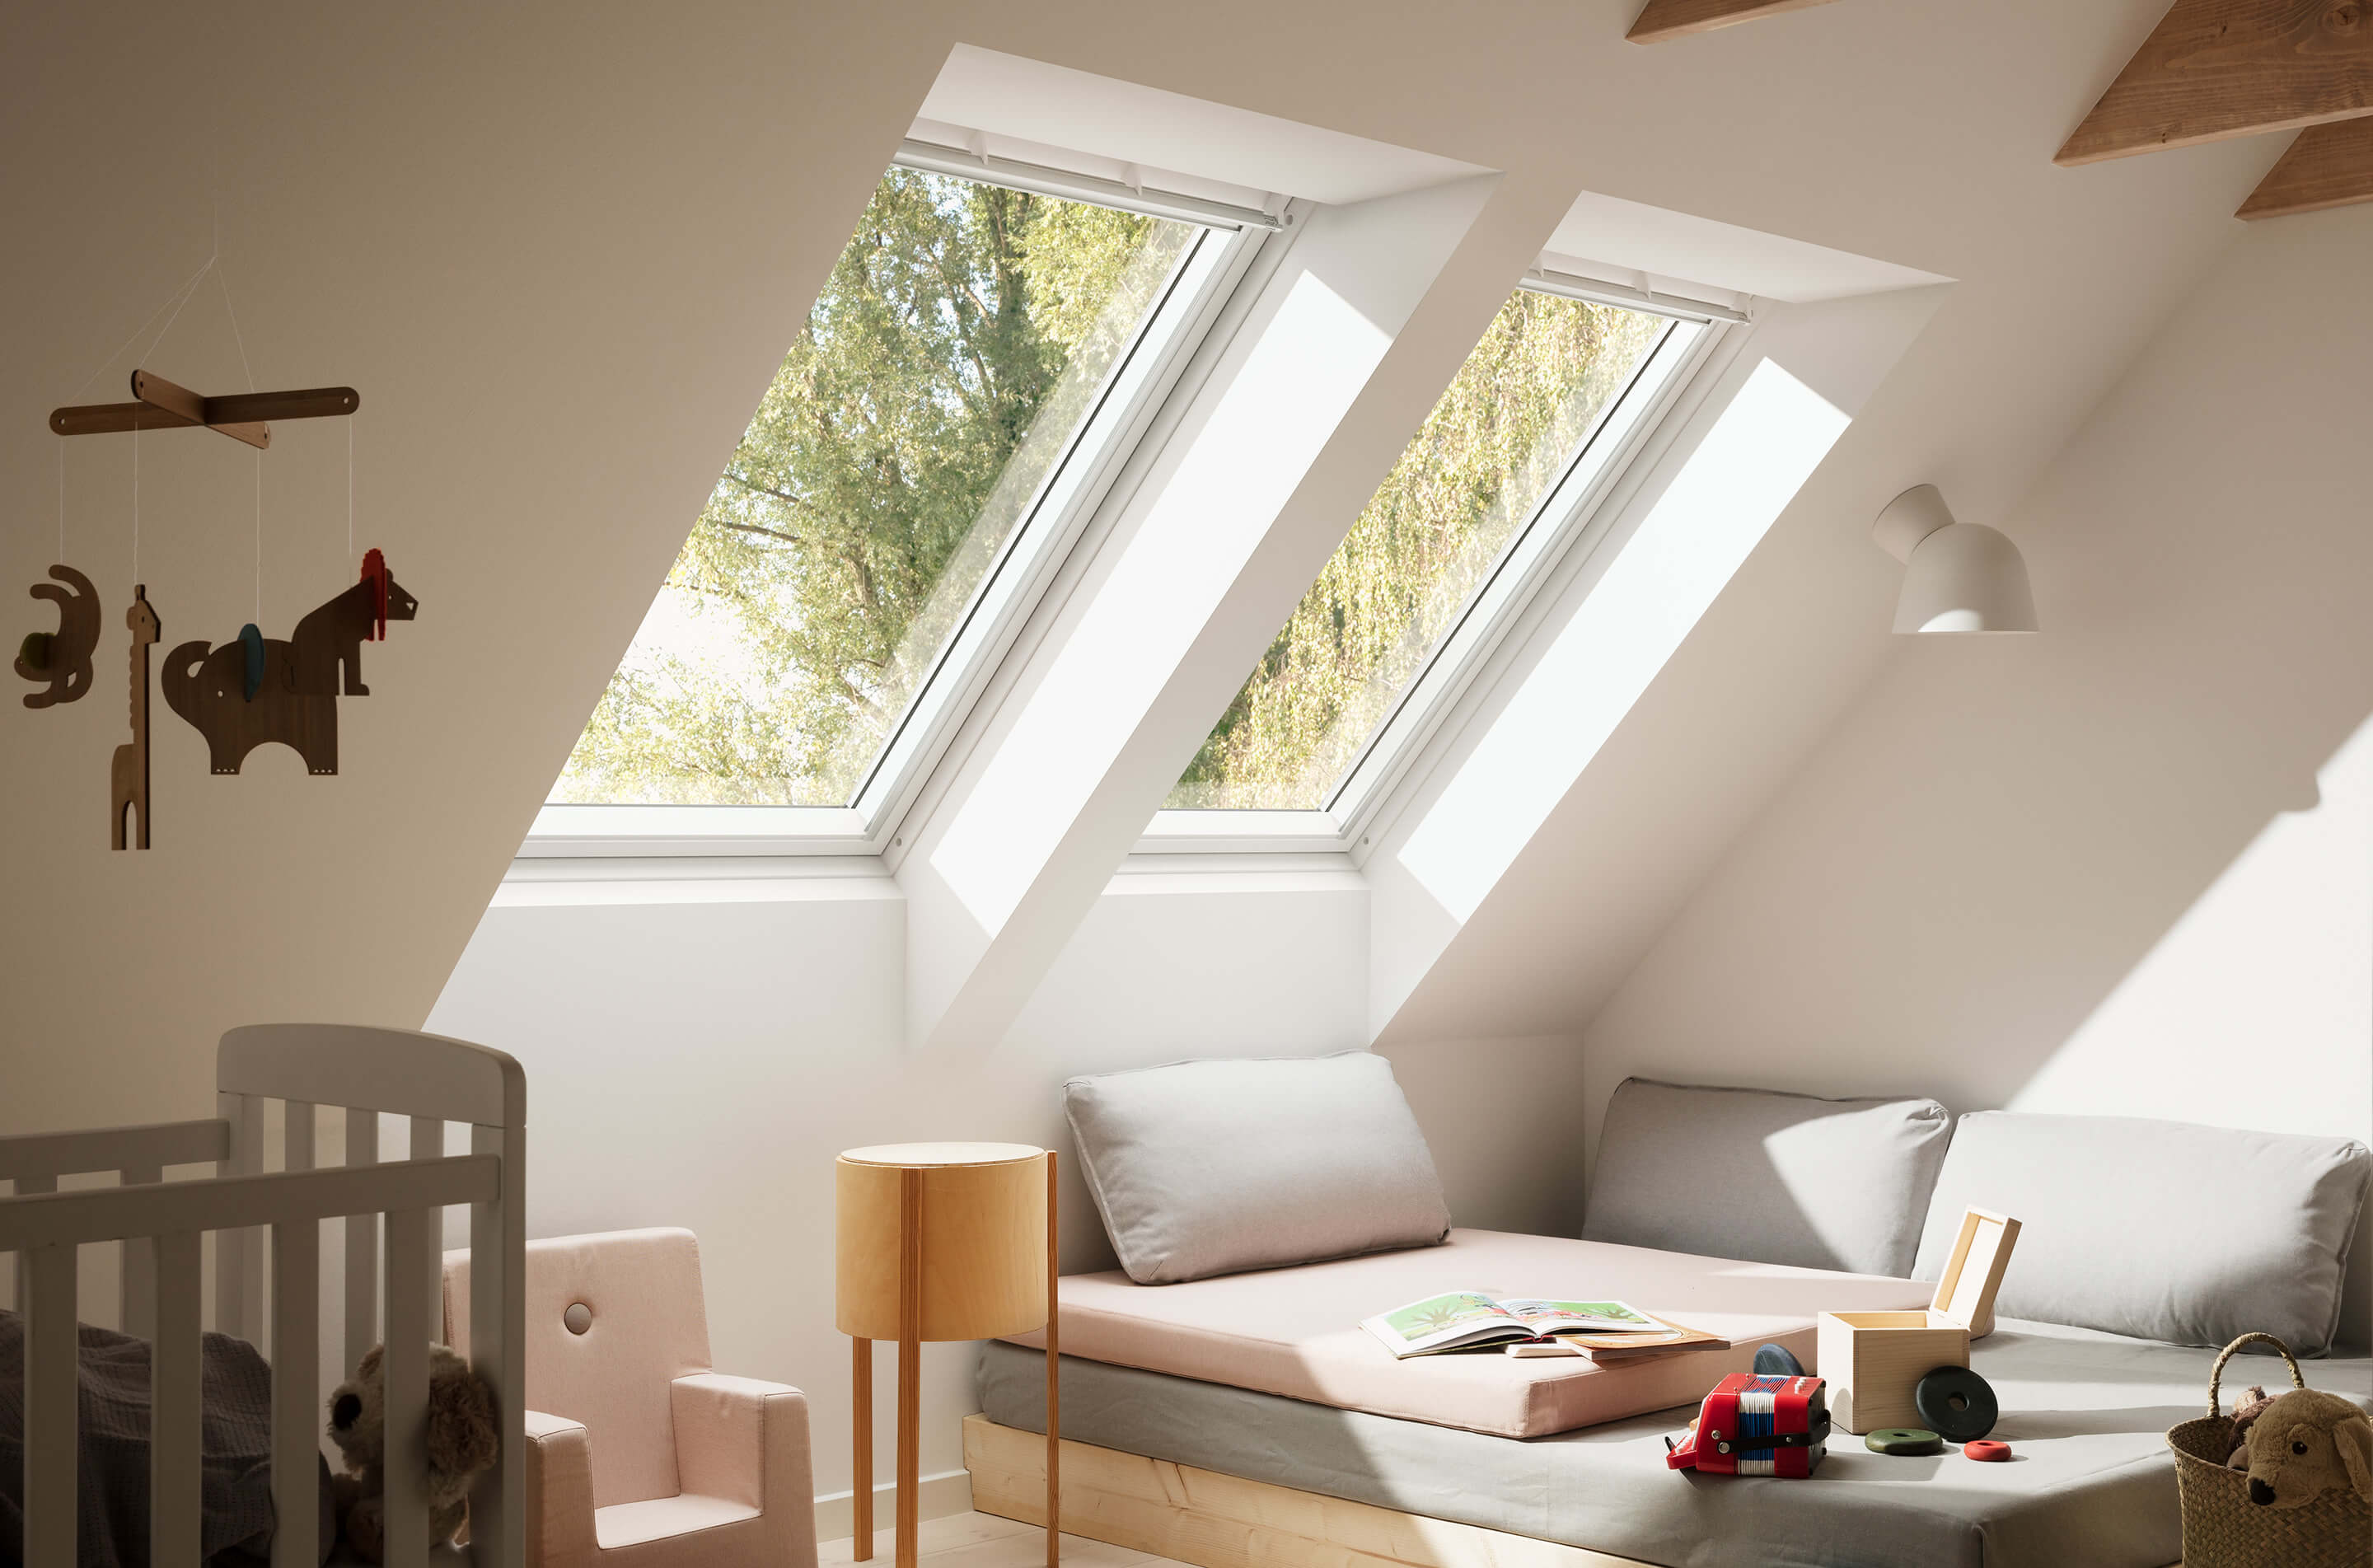 VELUX side-by-side window solution with two roof windows in a child's bedroom